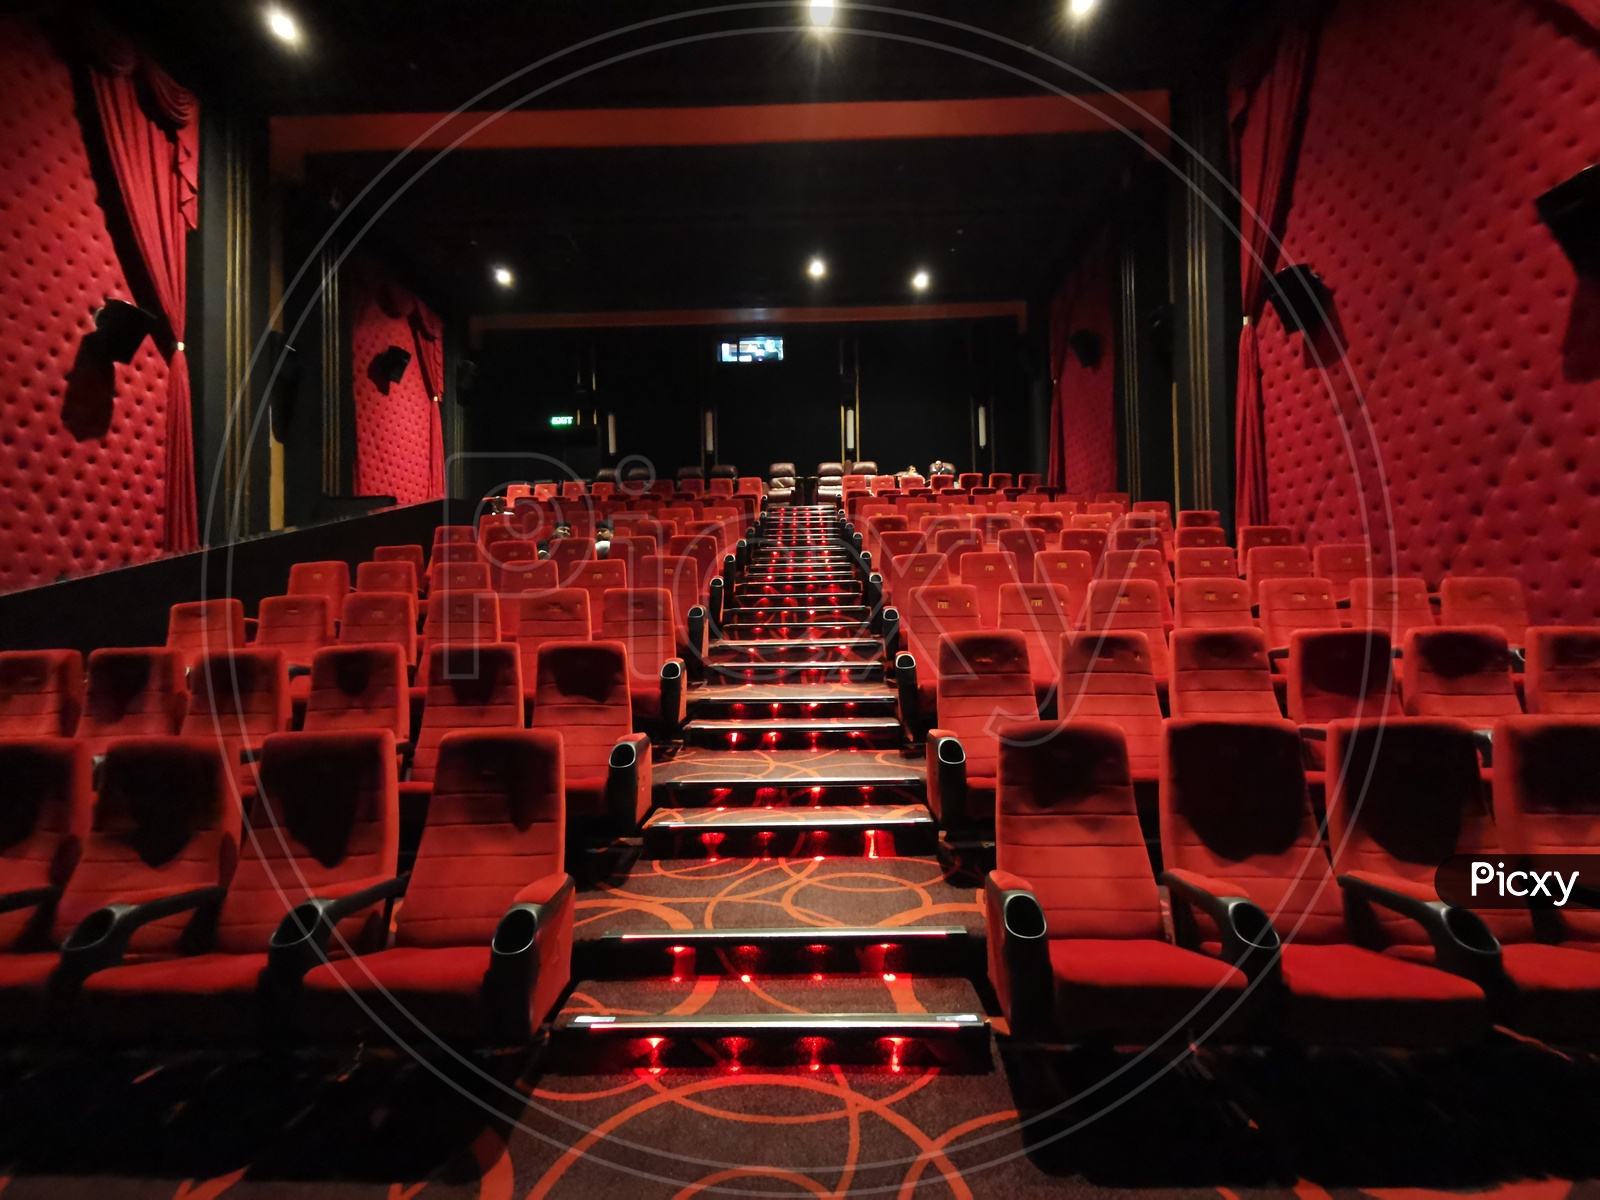 Empty Movie Theater Auditorium With Red Seats in Rows